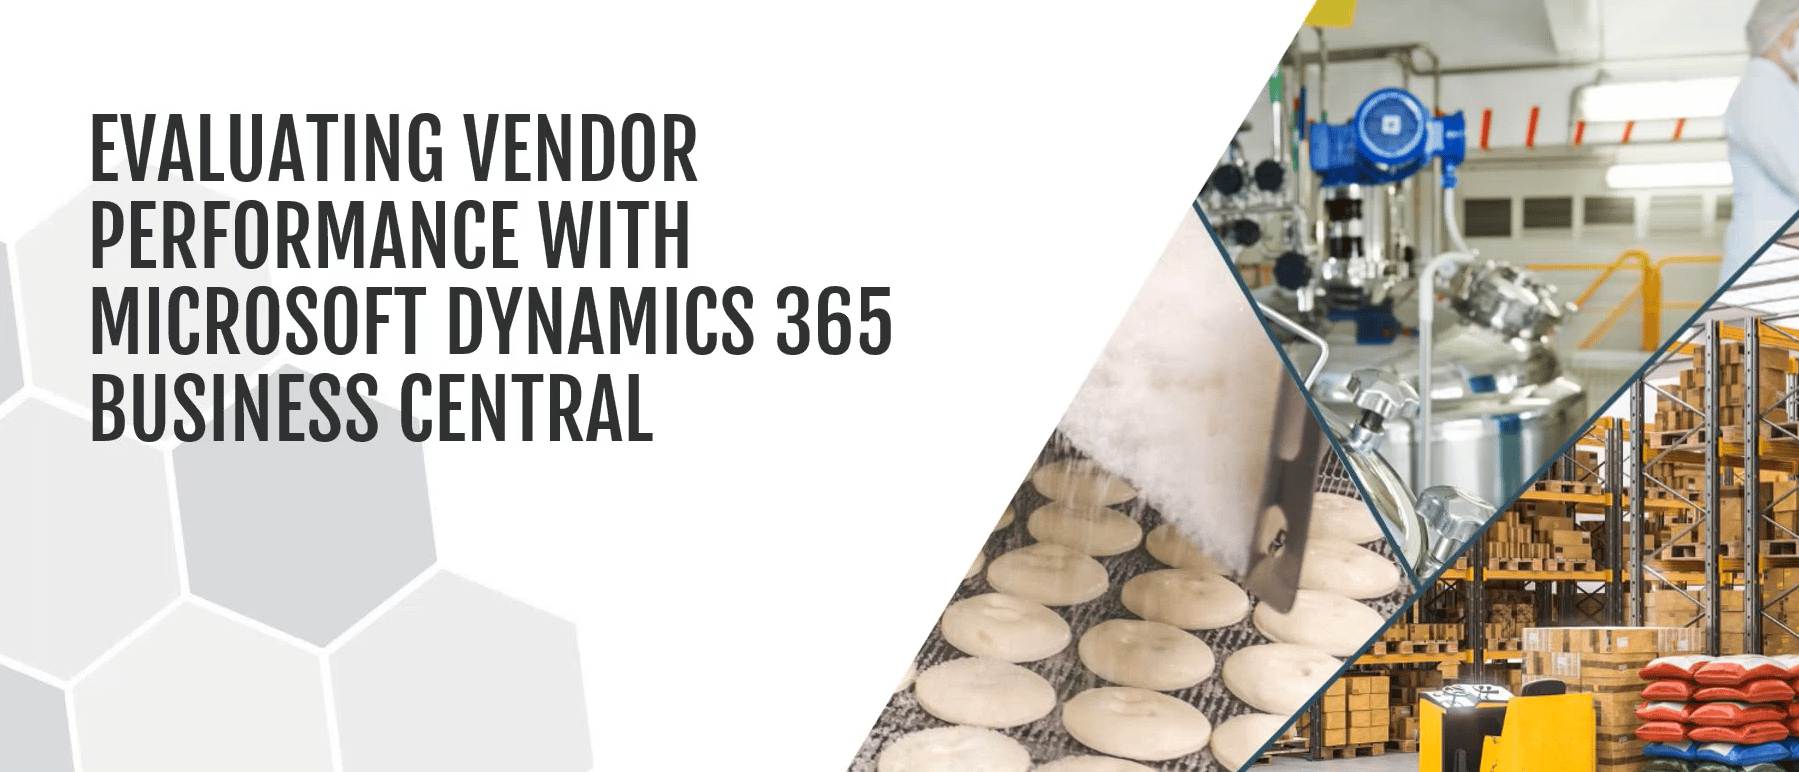 Track Vendor Ratings in Dynamics 365 Business Central with YAVEON ProBatch